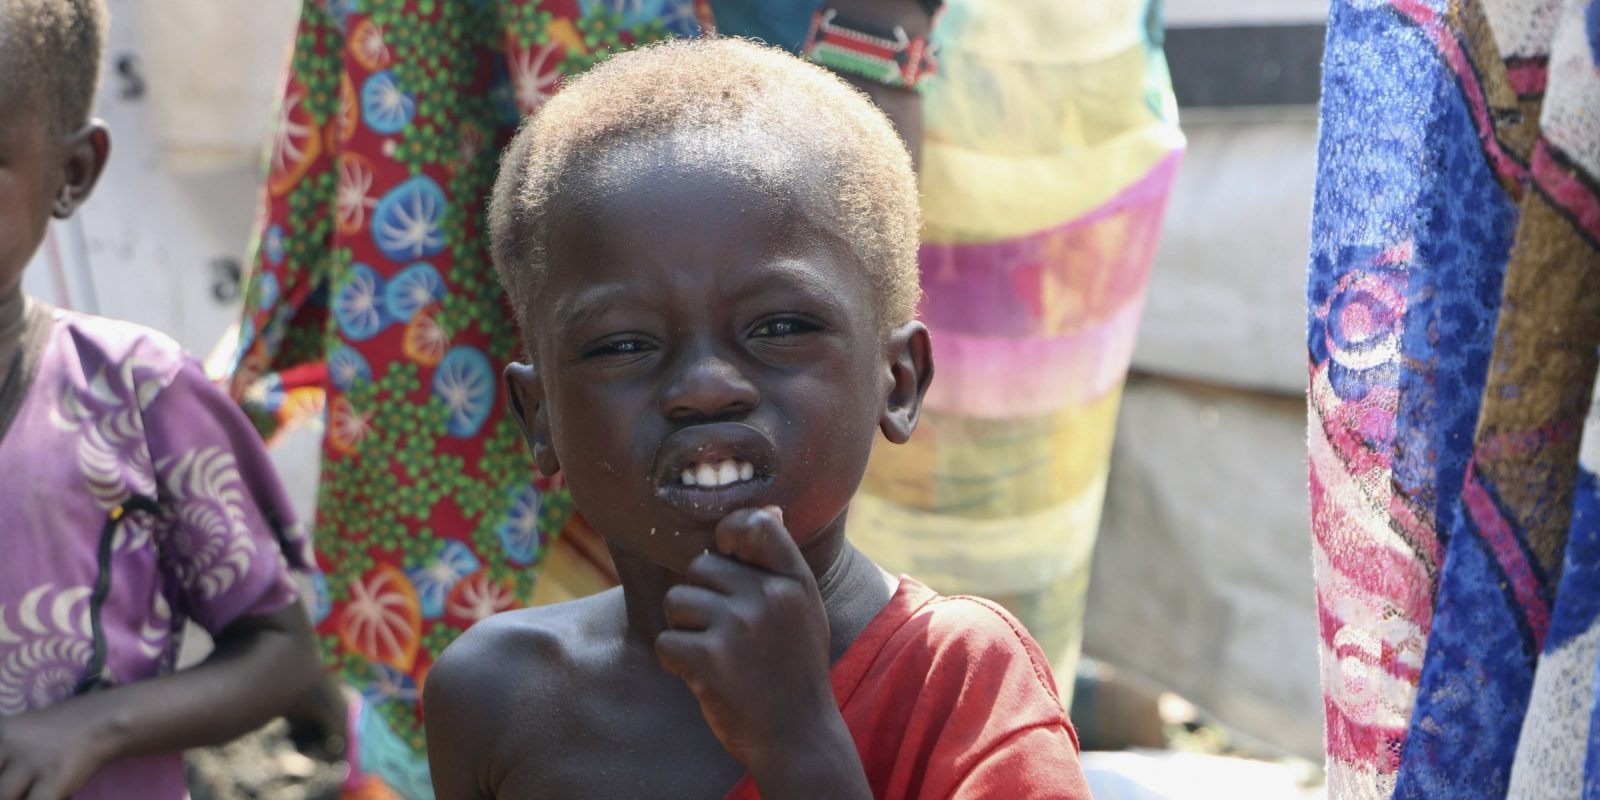 More than 1 million children in southern Sudan are at risk of dying from severe acute malnutrition